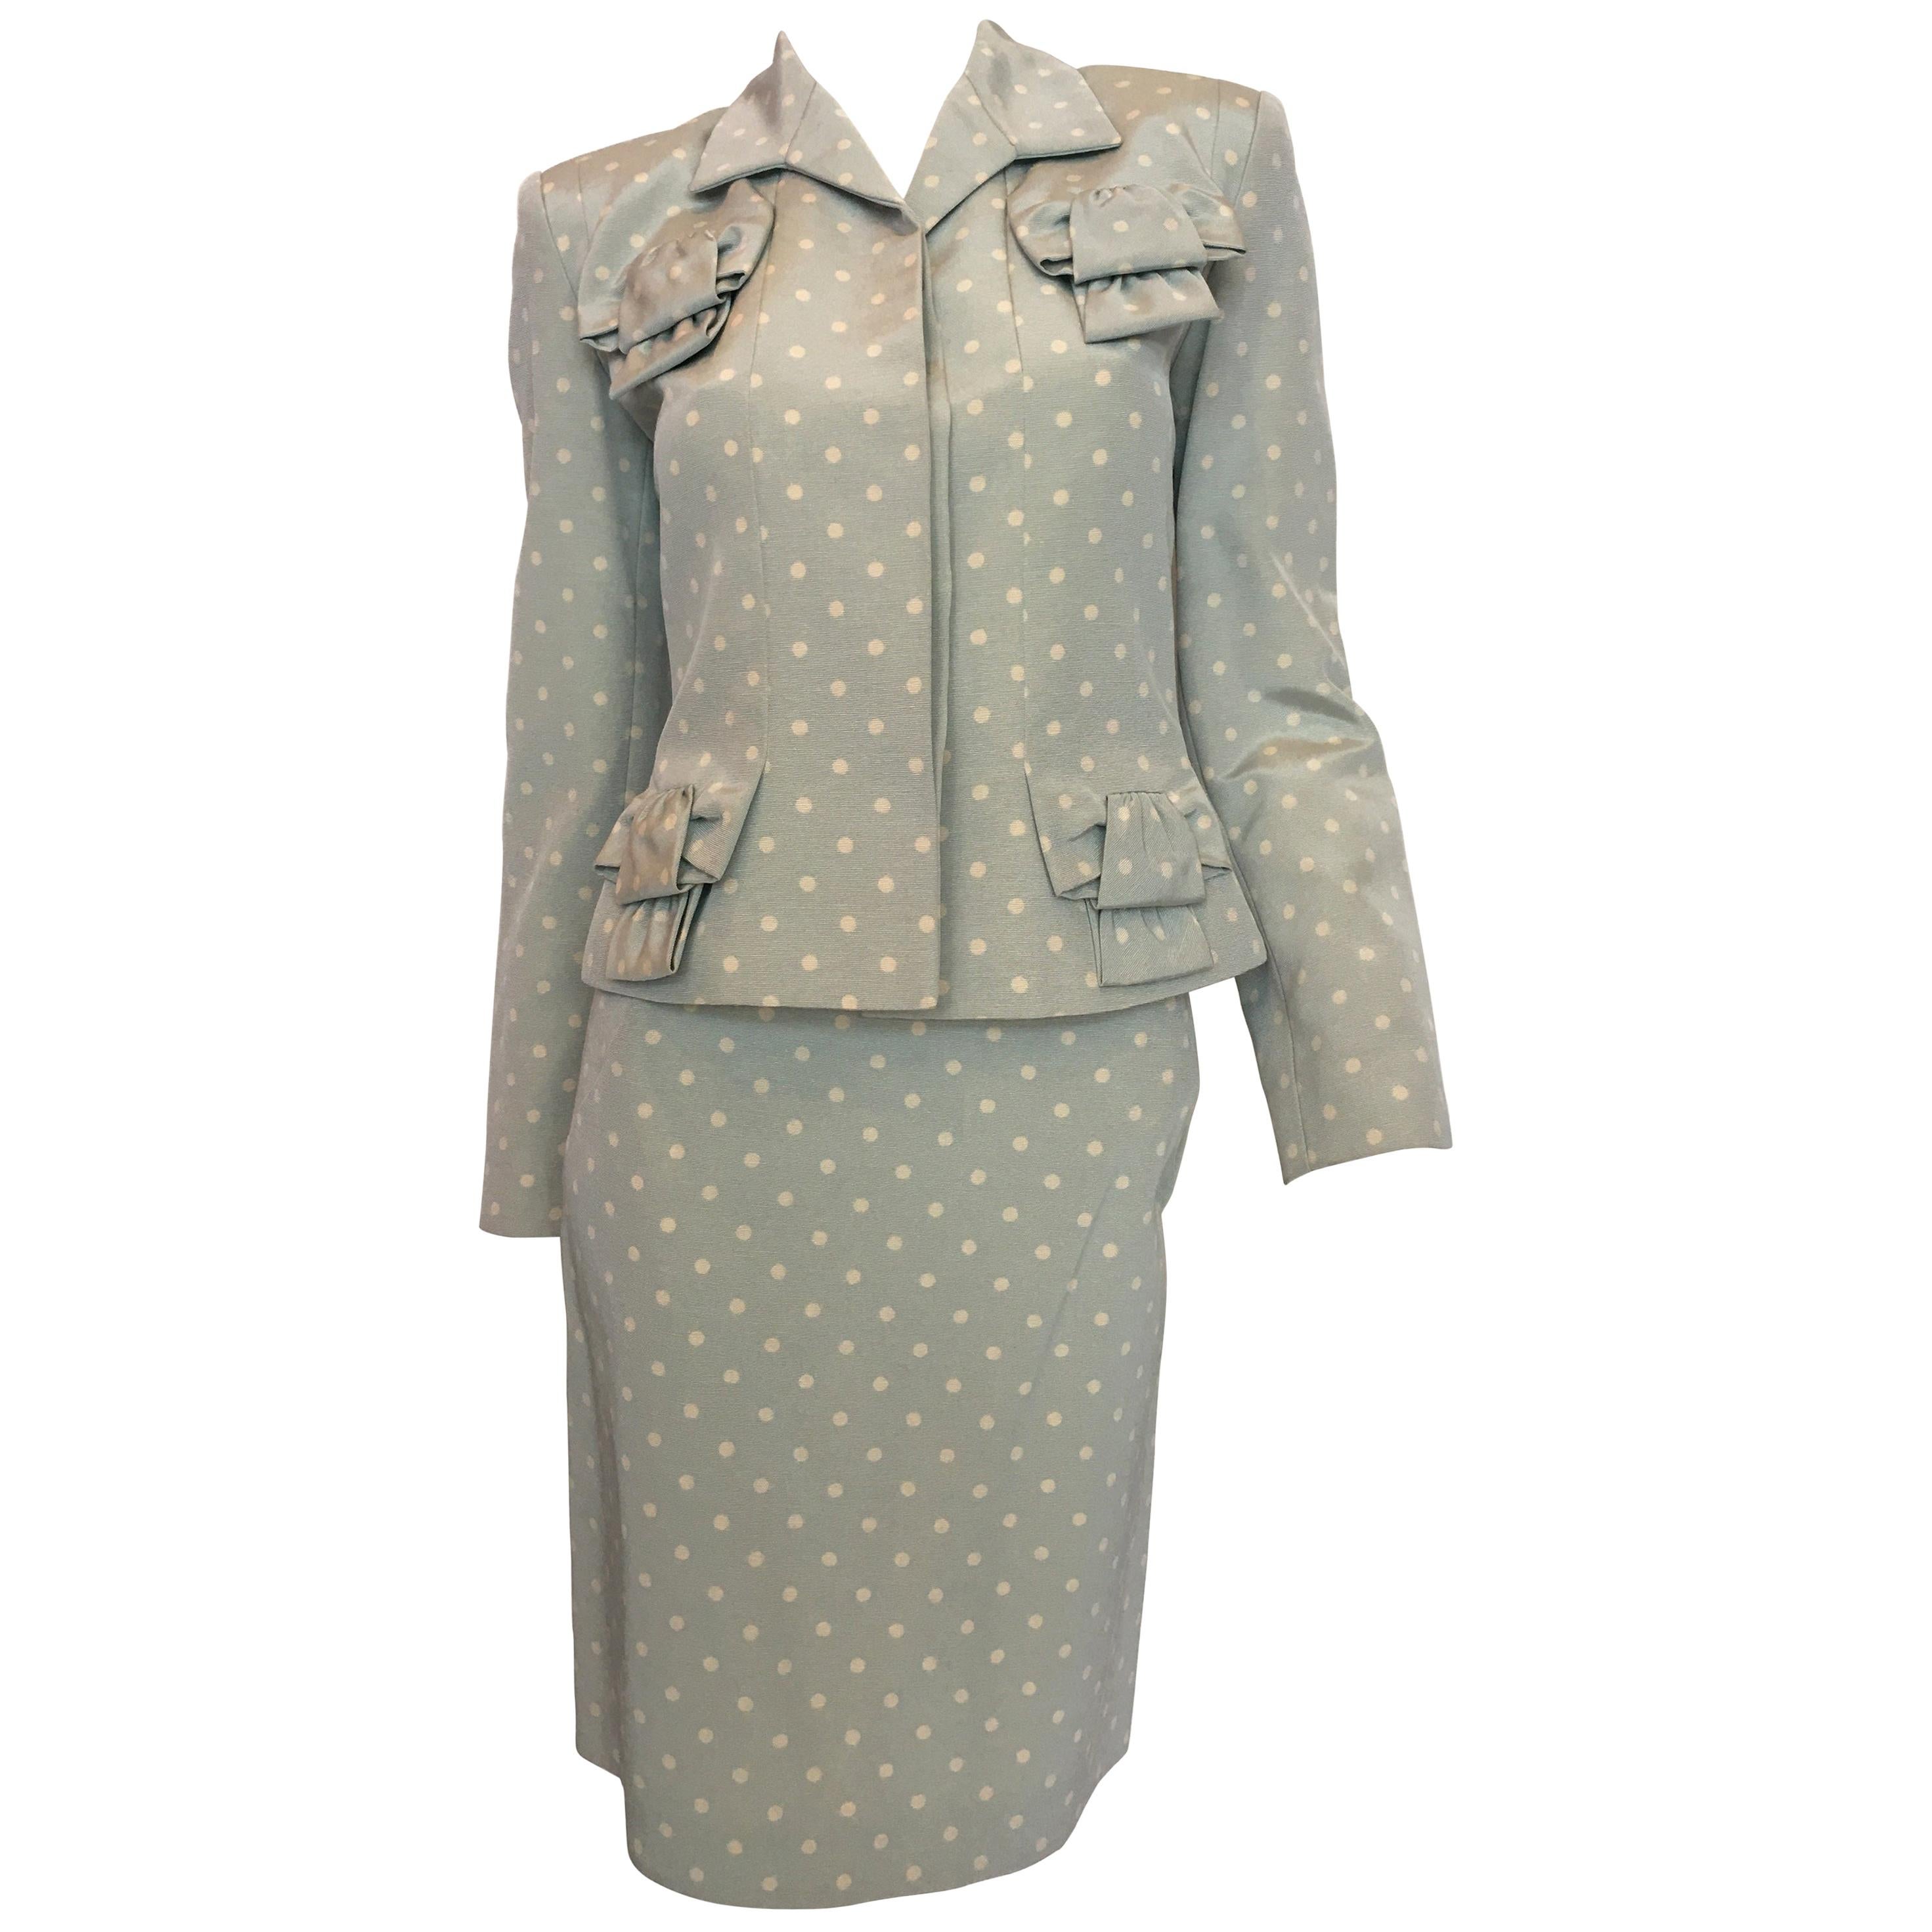  Givenchy Powder Blue and White Polka Dot Skirt Suit, 1990s  For Sale